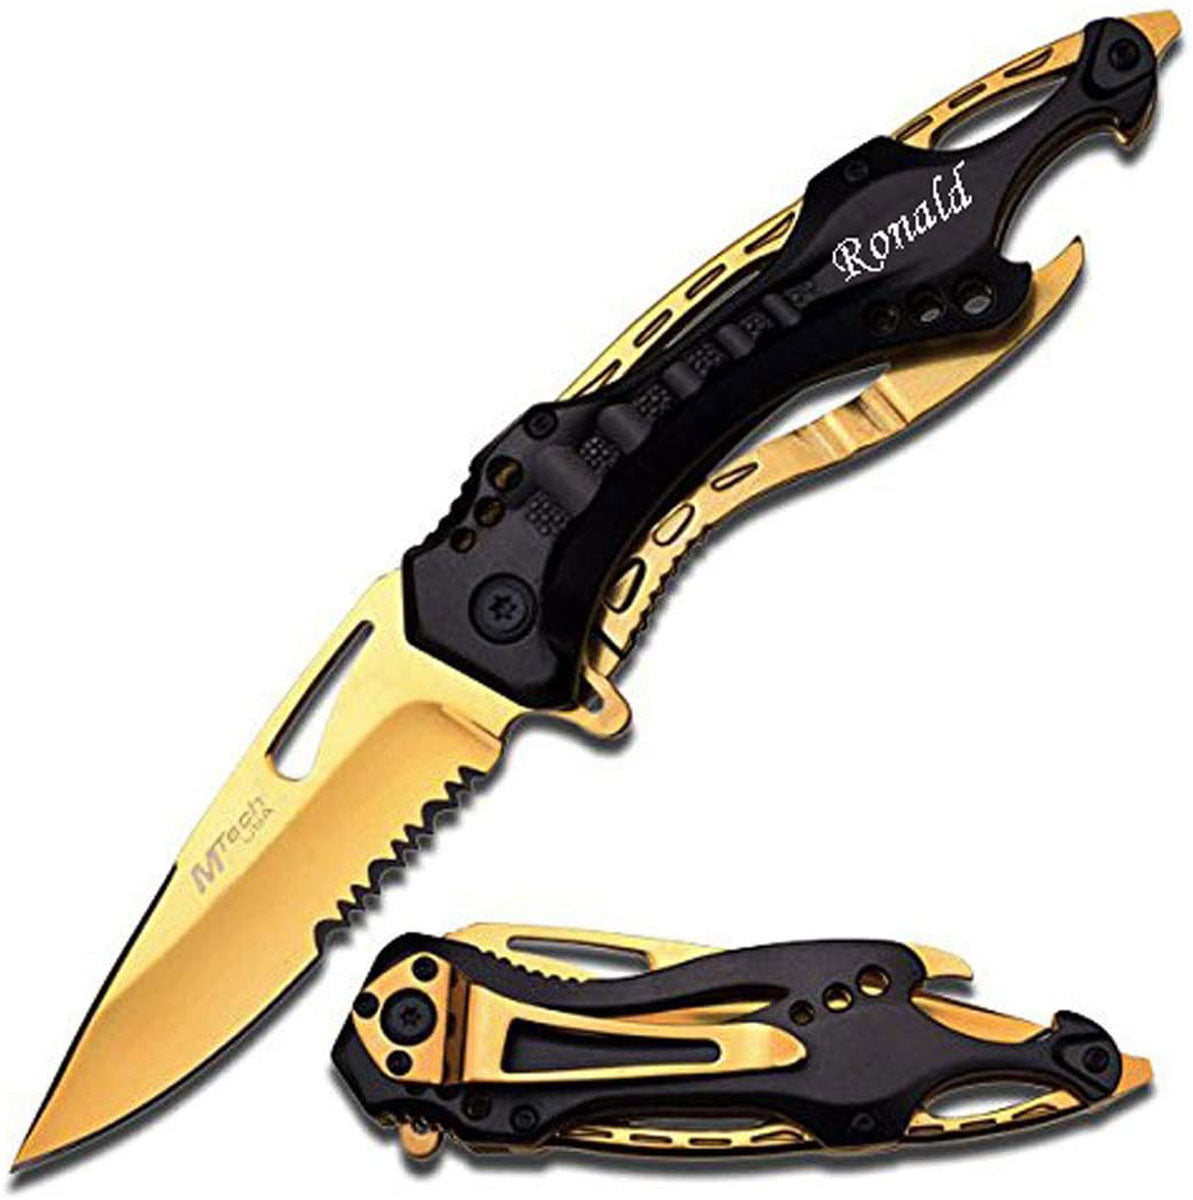 GIFTS INFINITY 4.5" Closed Spring Assist Pocket Folding Knife, Sharp Gold Coated Blade, Black and Gold Aluminum Handle